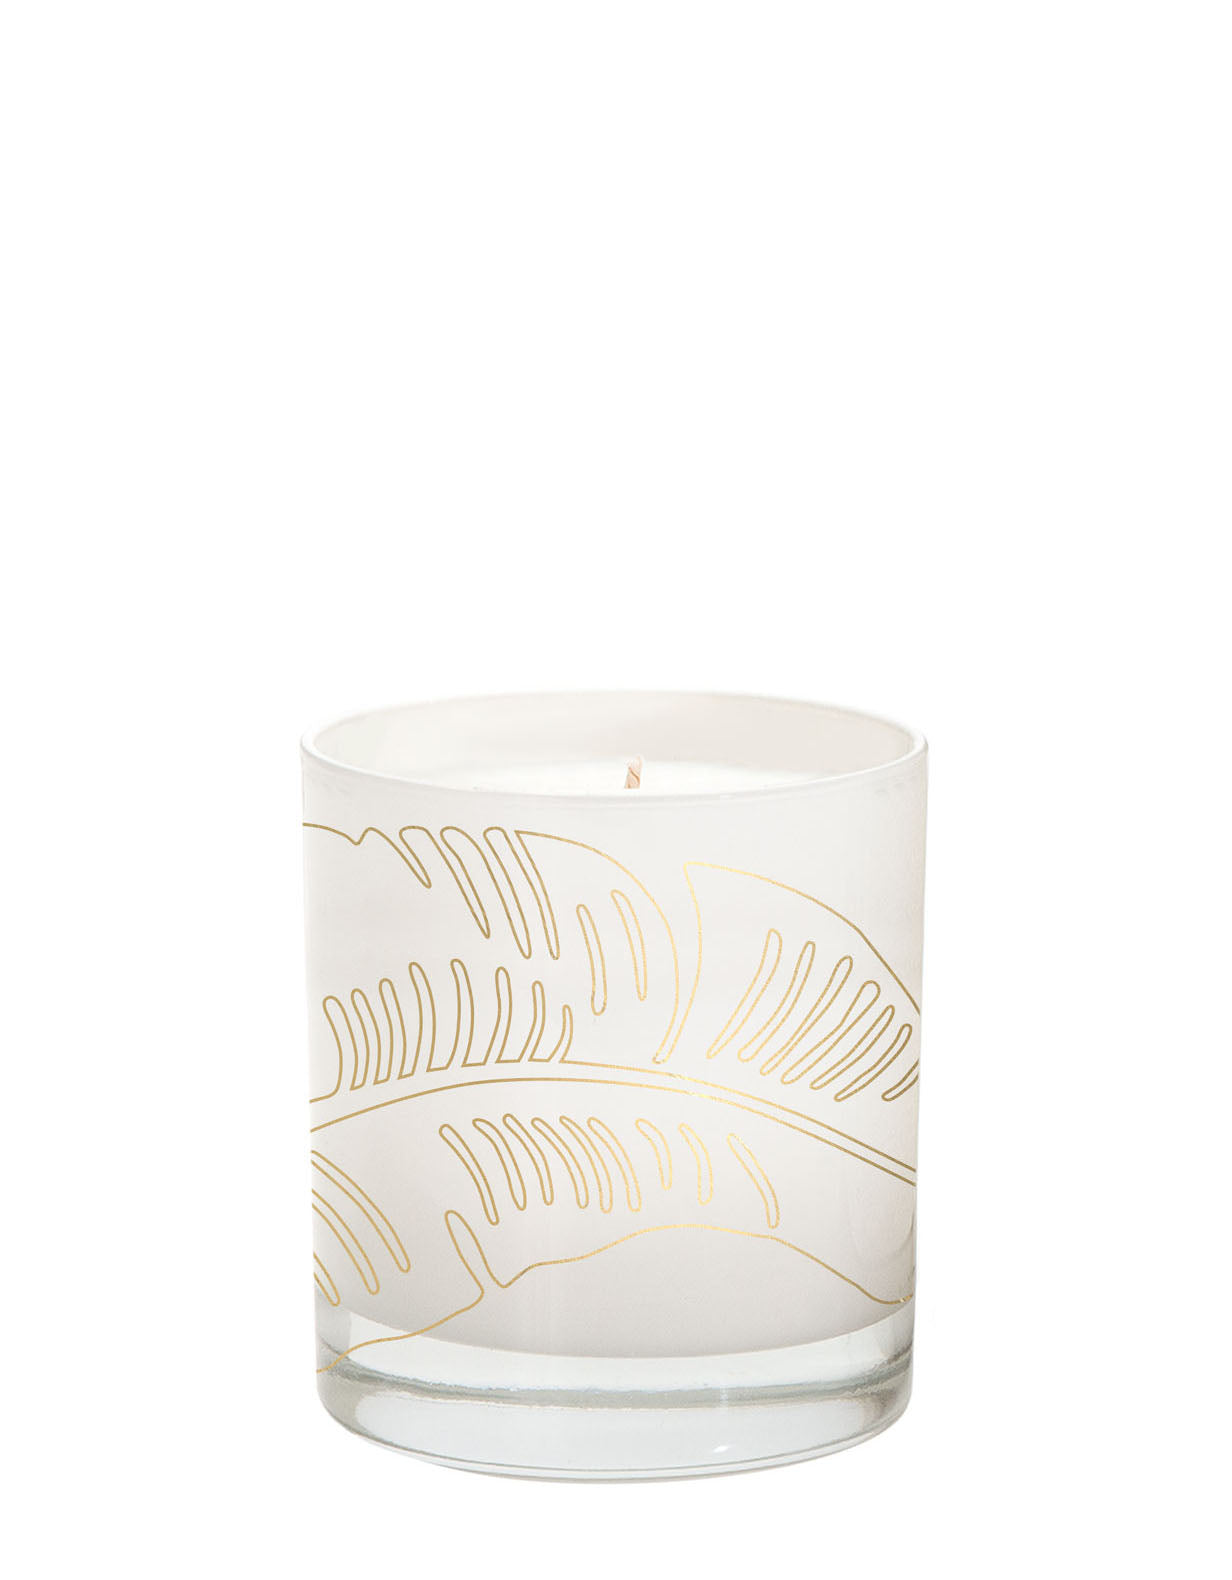 Beverly Hills Hotel Candle